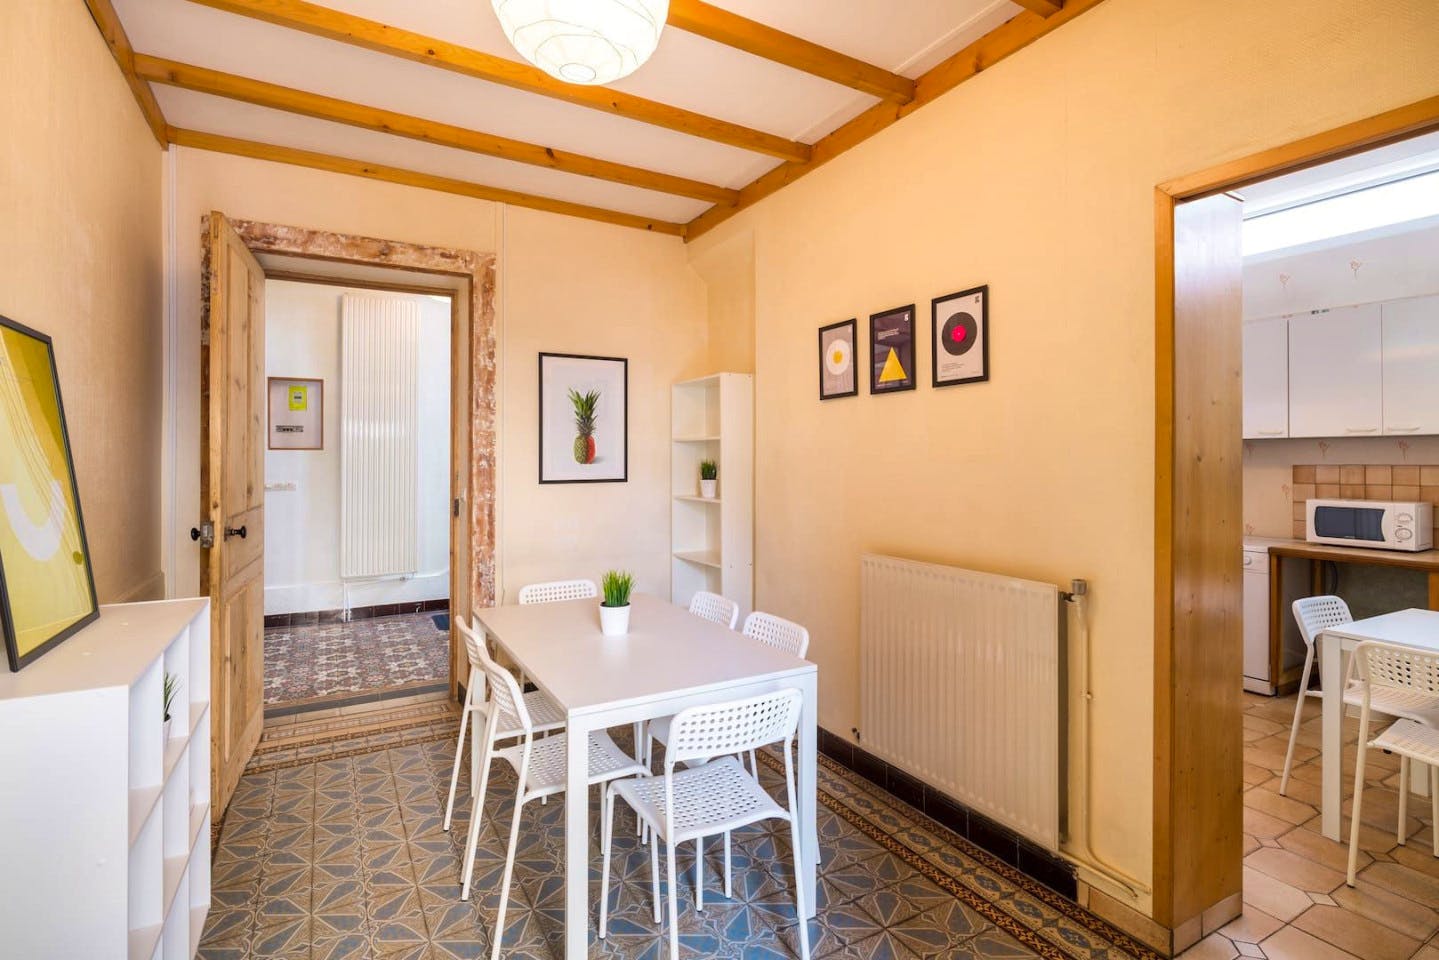 8-Bed Apartment on Rue Villebois Mareuil